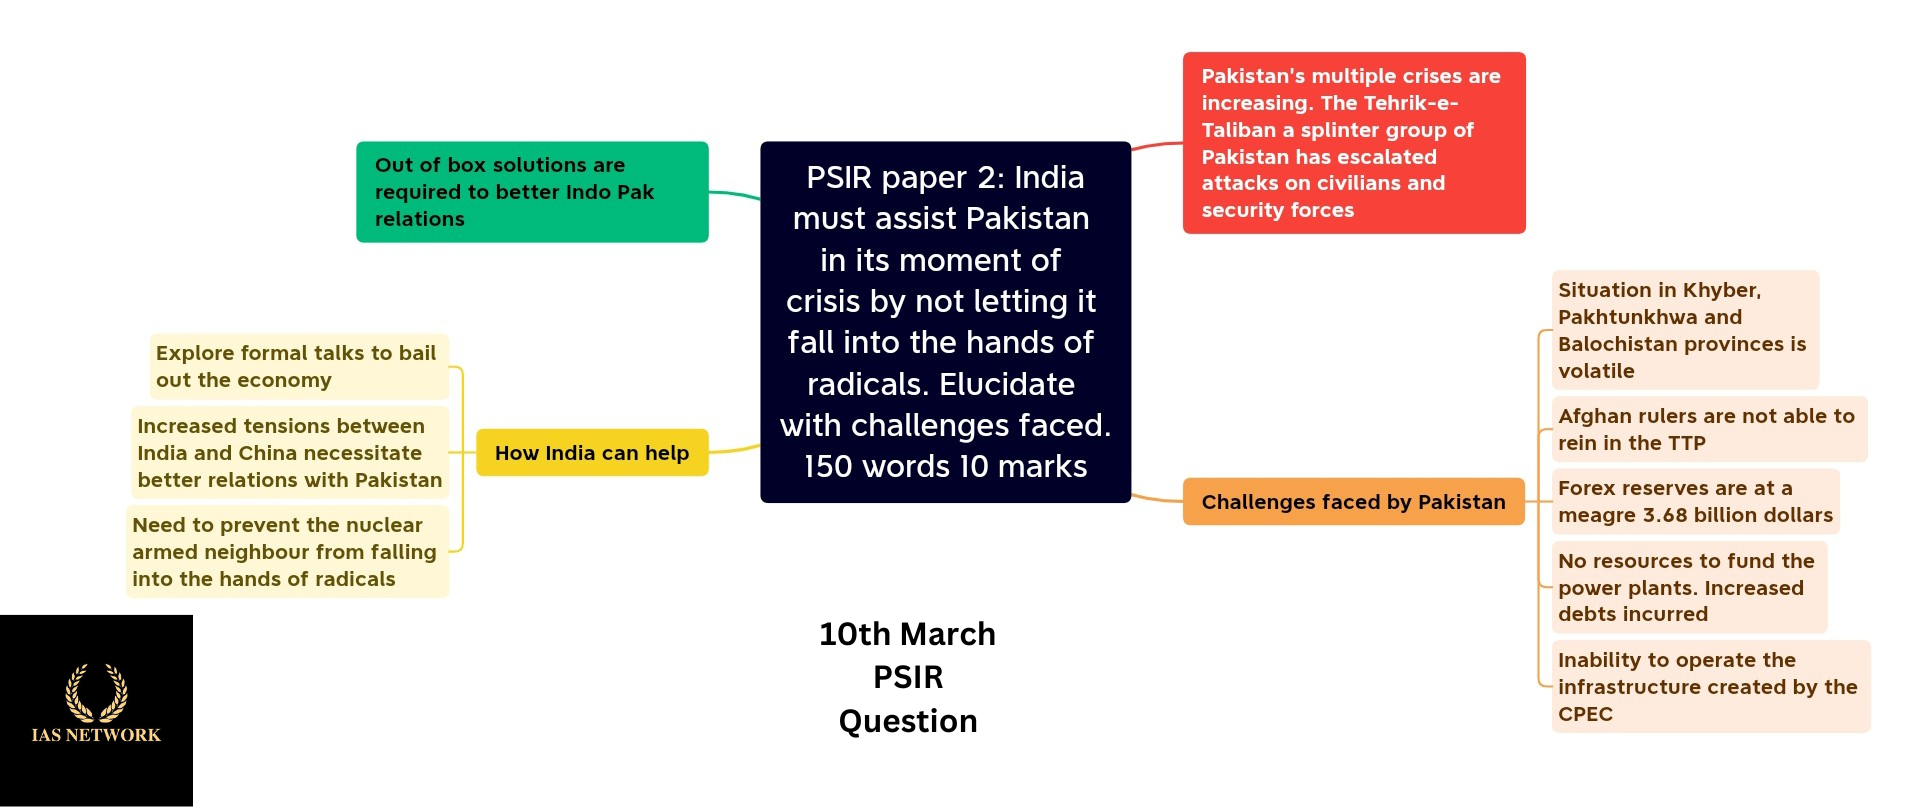 IAS NETWORK 10th MARCH PSIR QUESTION